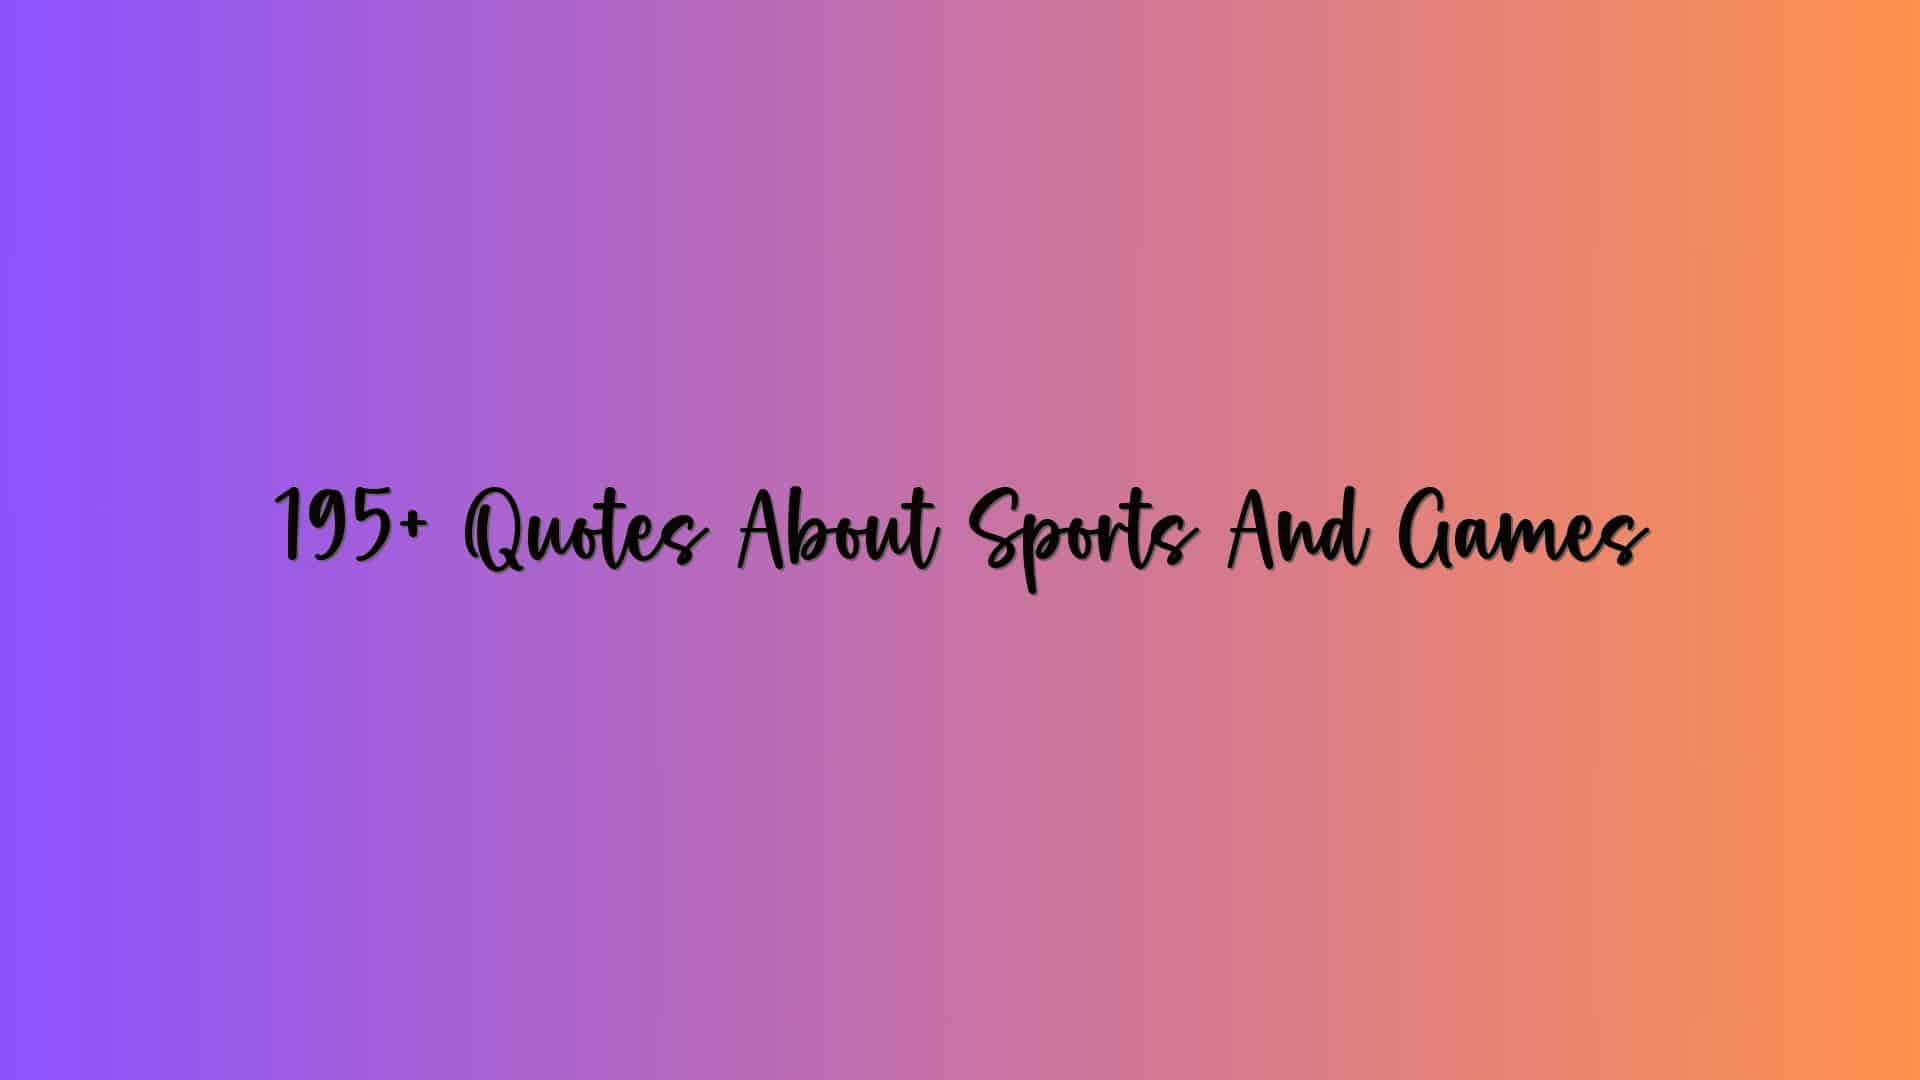 195+ Quotes About Sports And Games